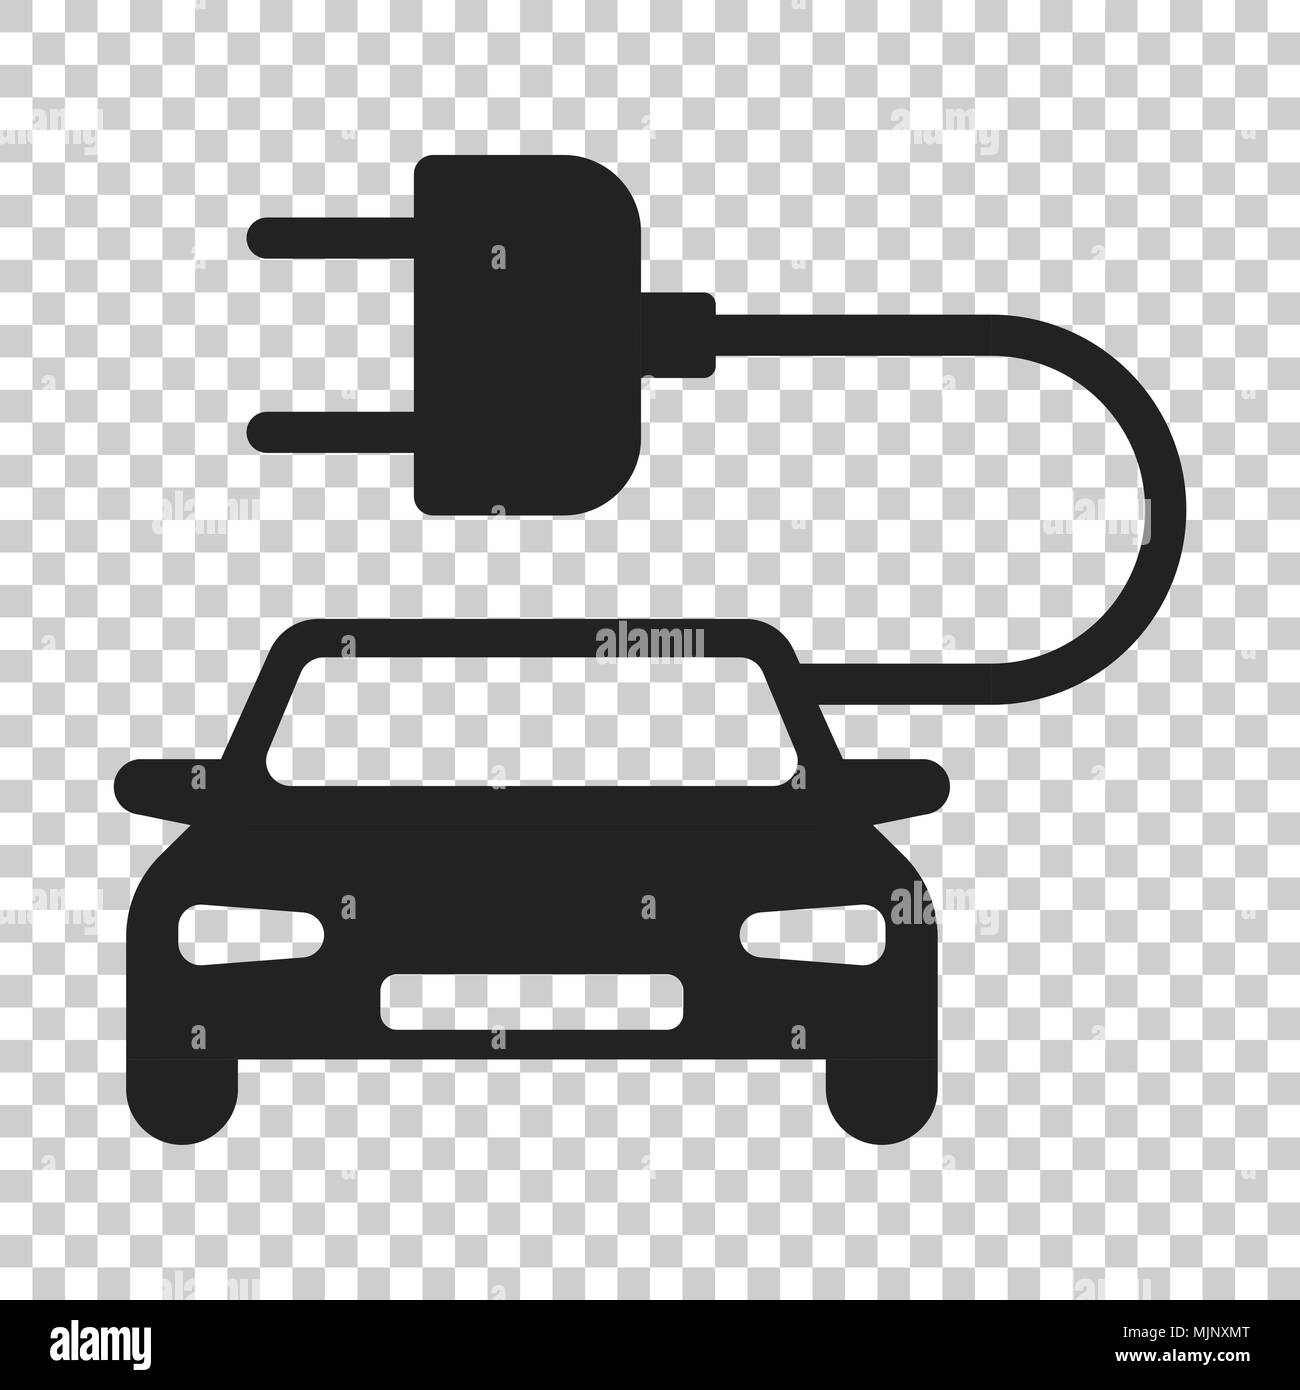 Electro car vector icon in flat style. Electric automobile illustration on isolated transparent background. Ecology car sedan concept. Stock Vector